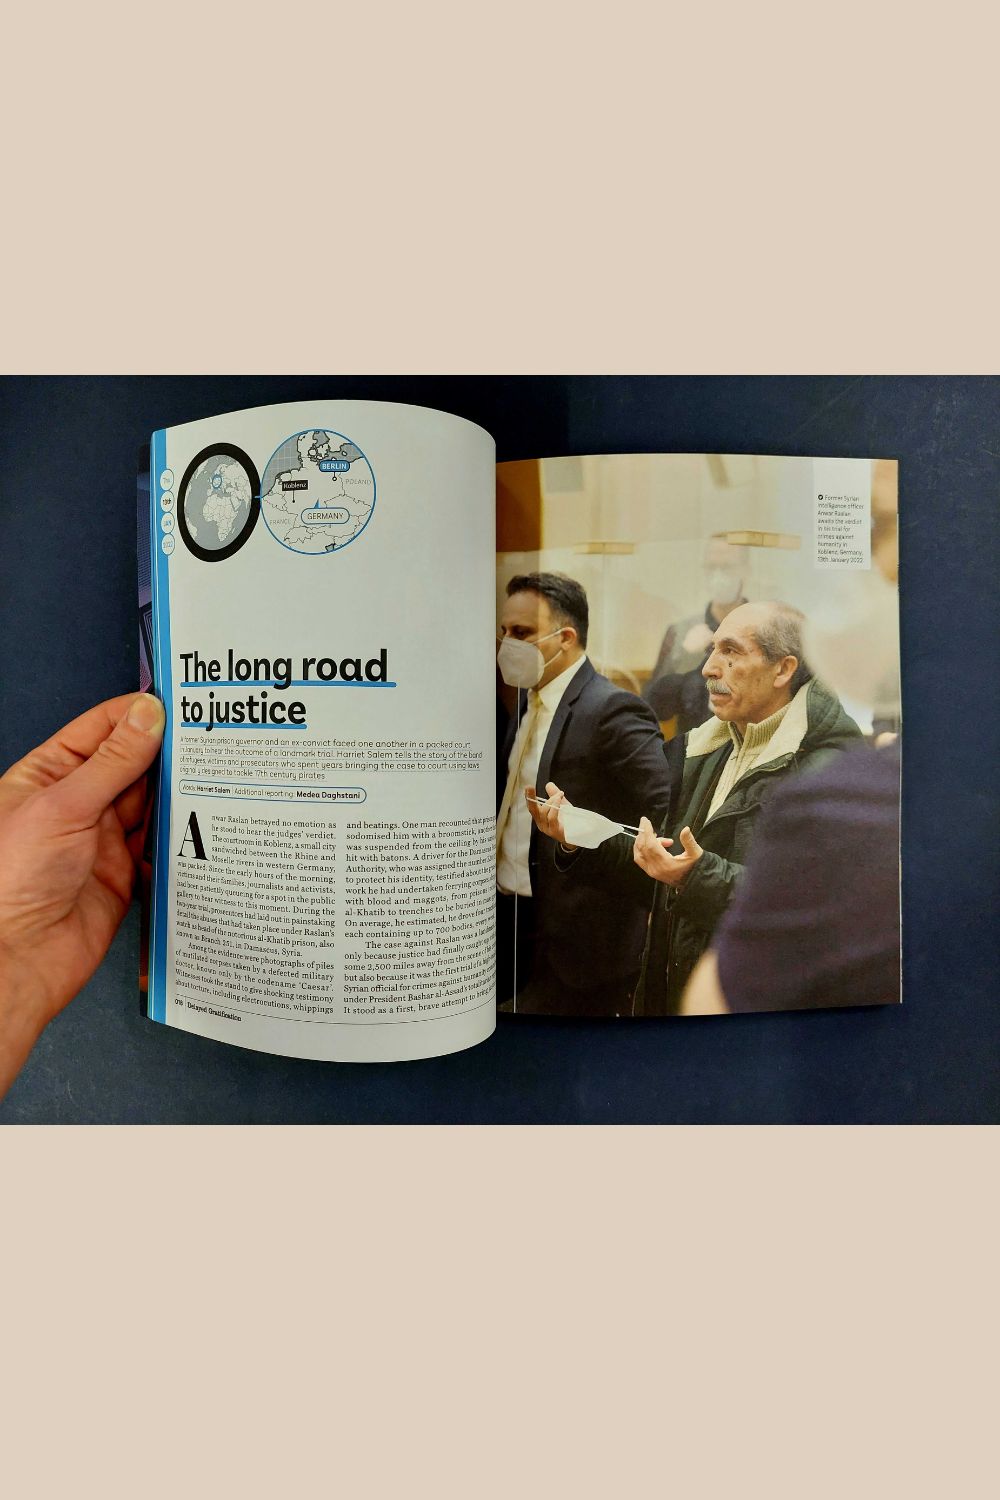 The long road to justice, an article featured in Delayed Gratification, issue 46.